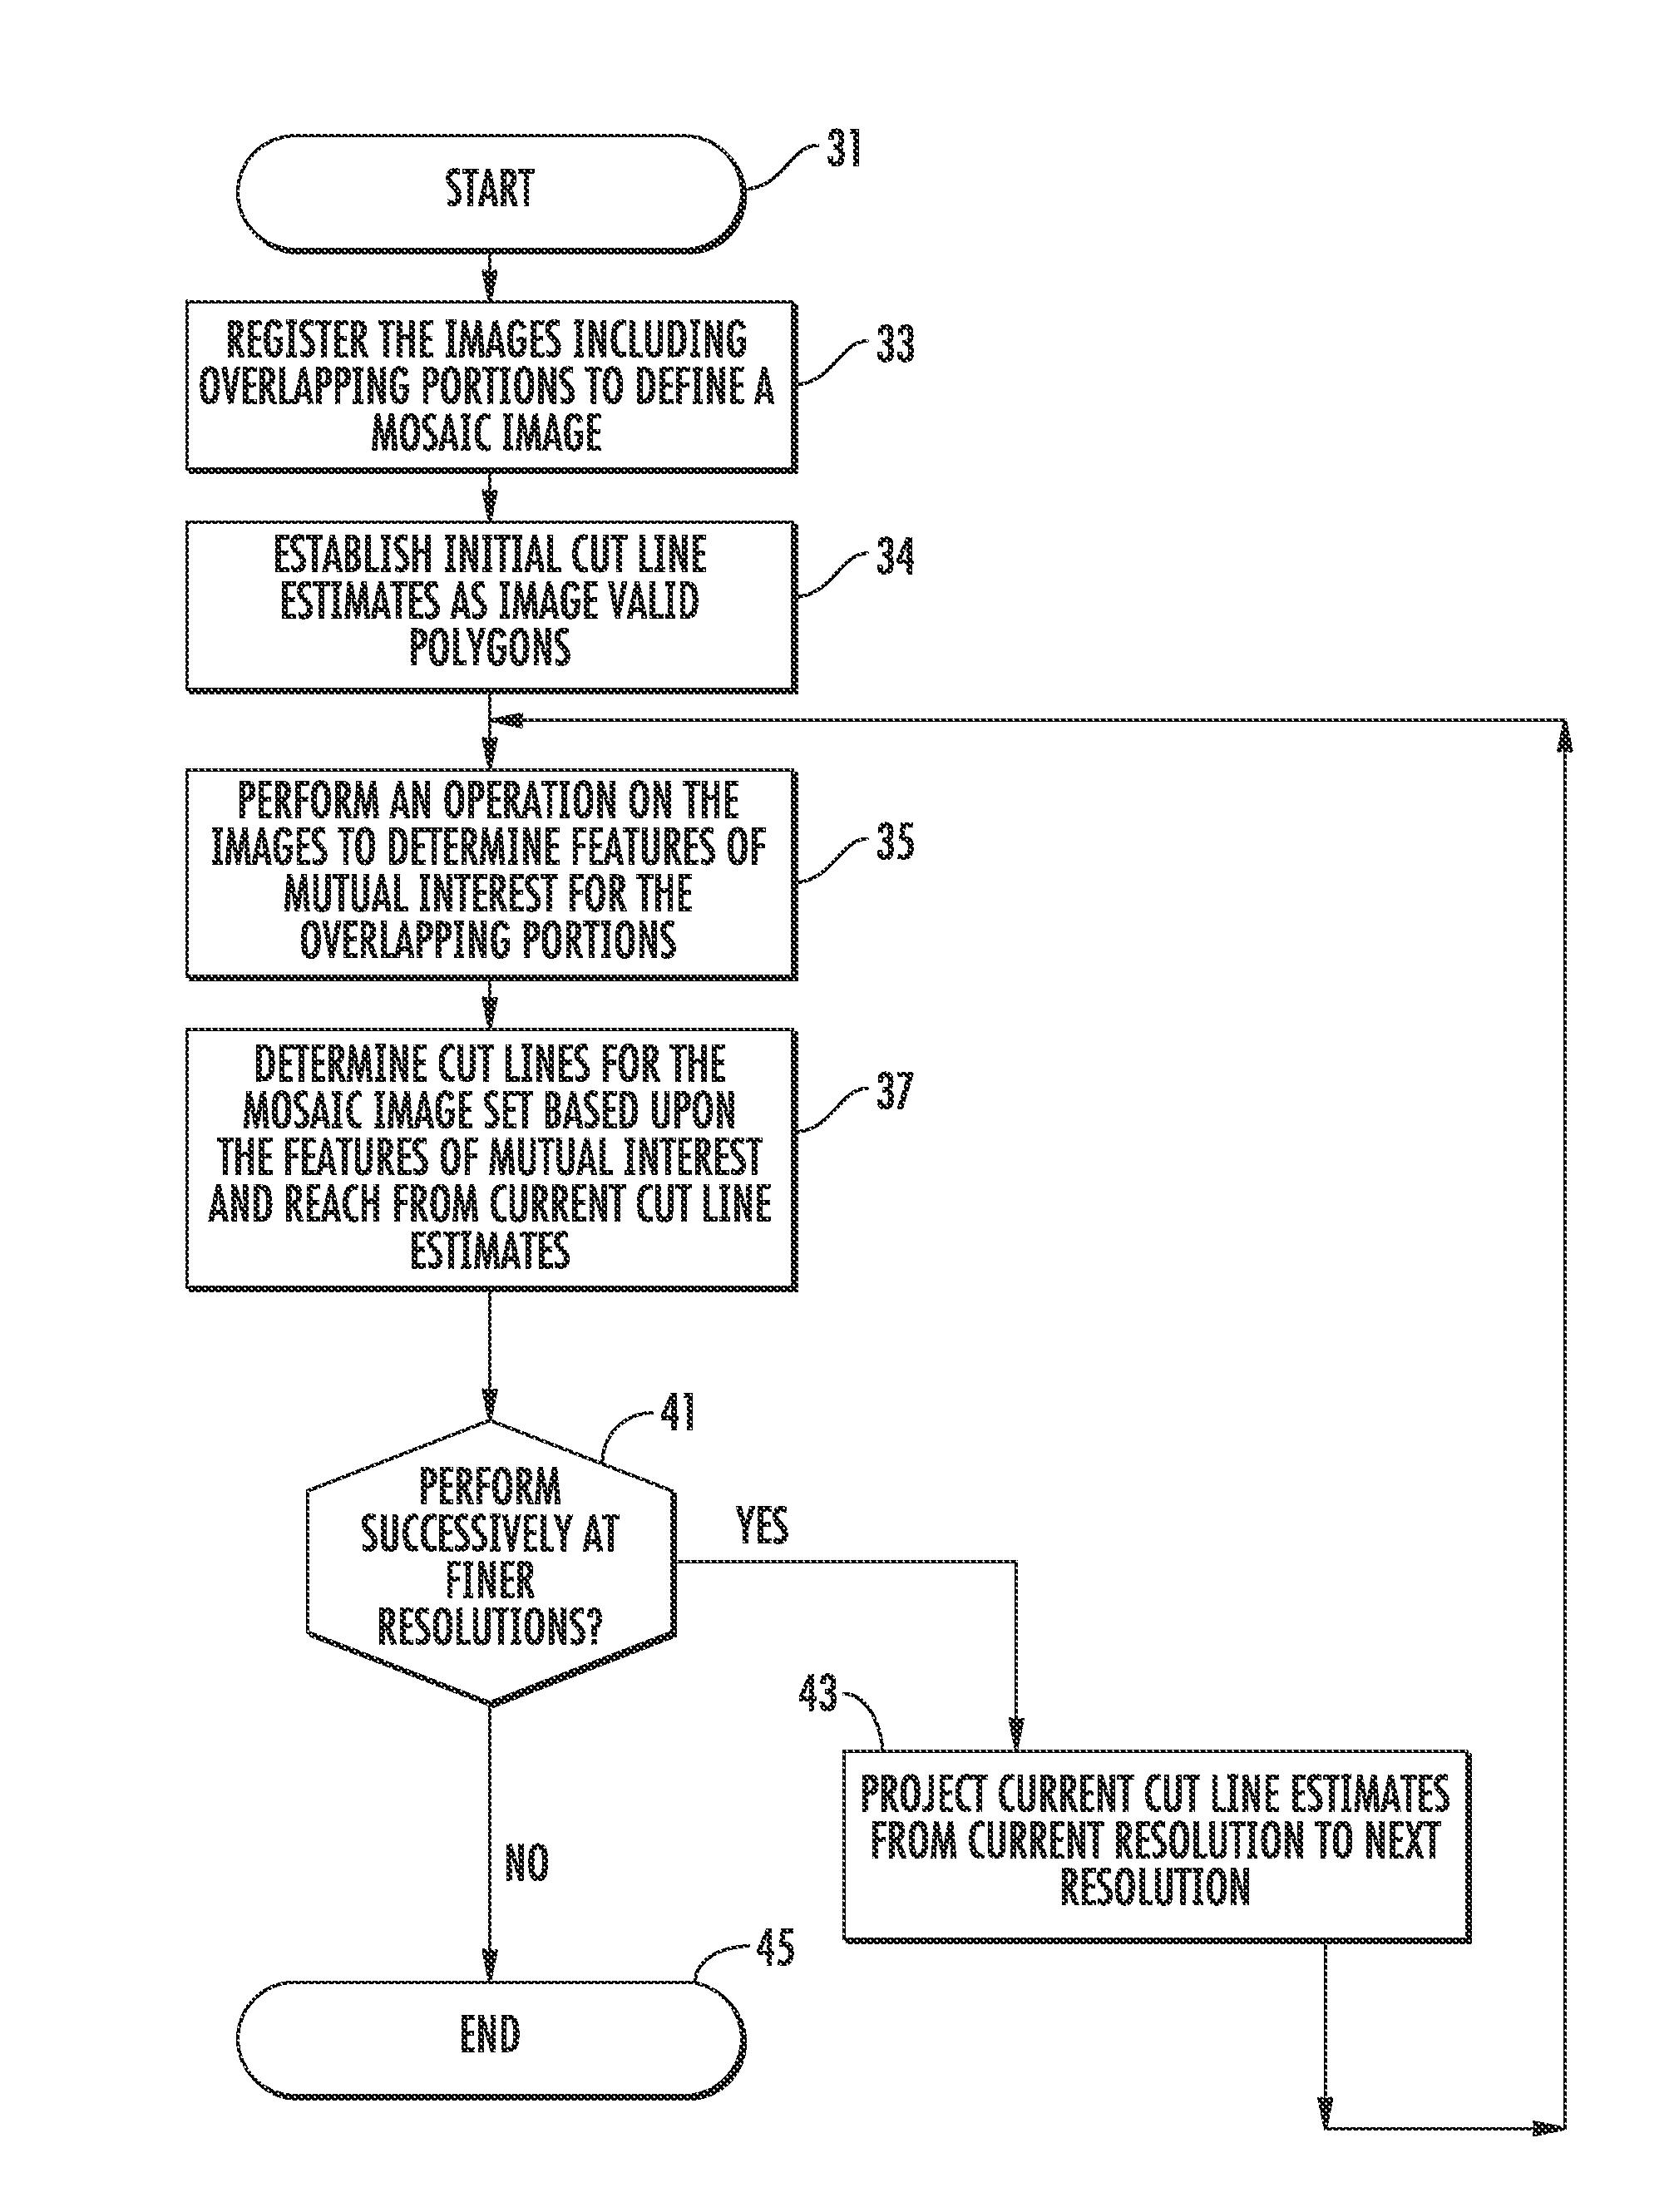 Image processing device for determining cut lines and related methods